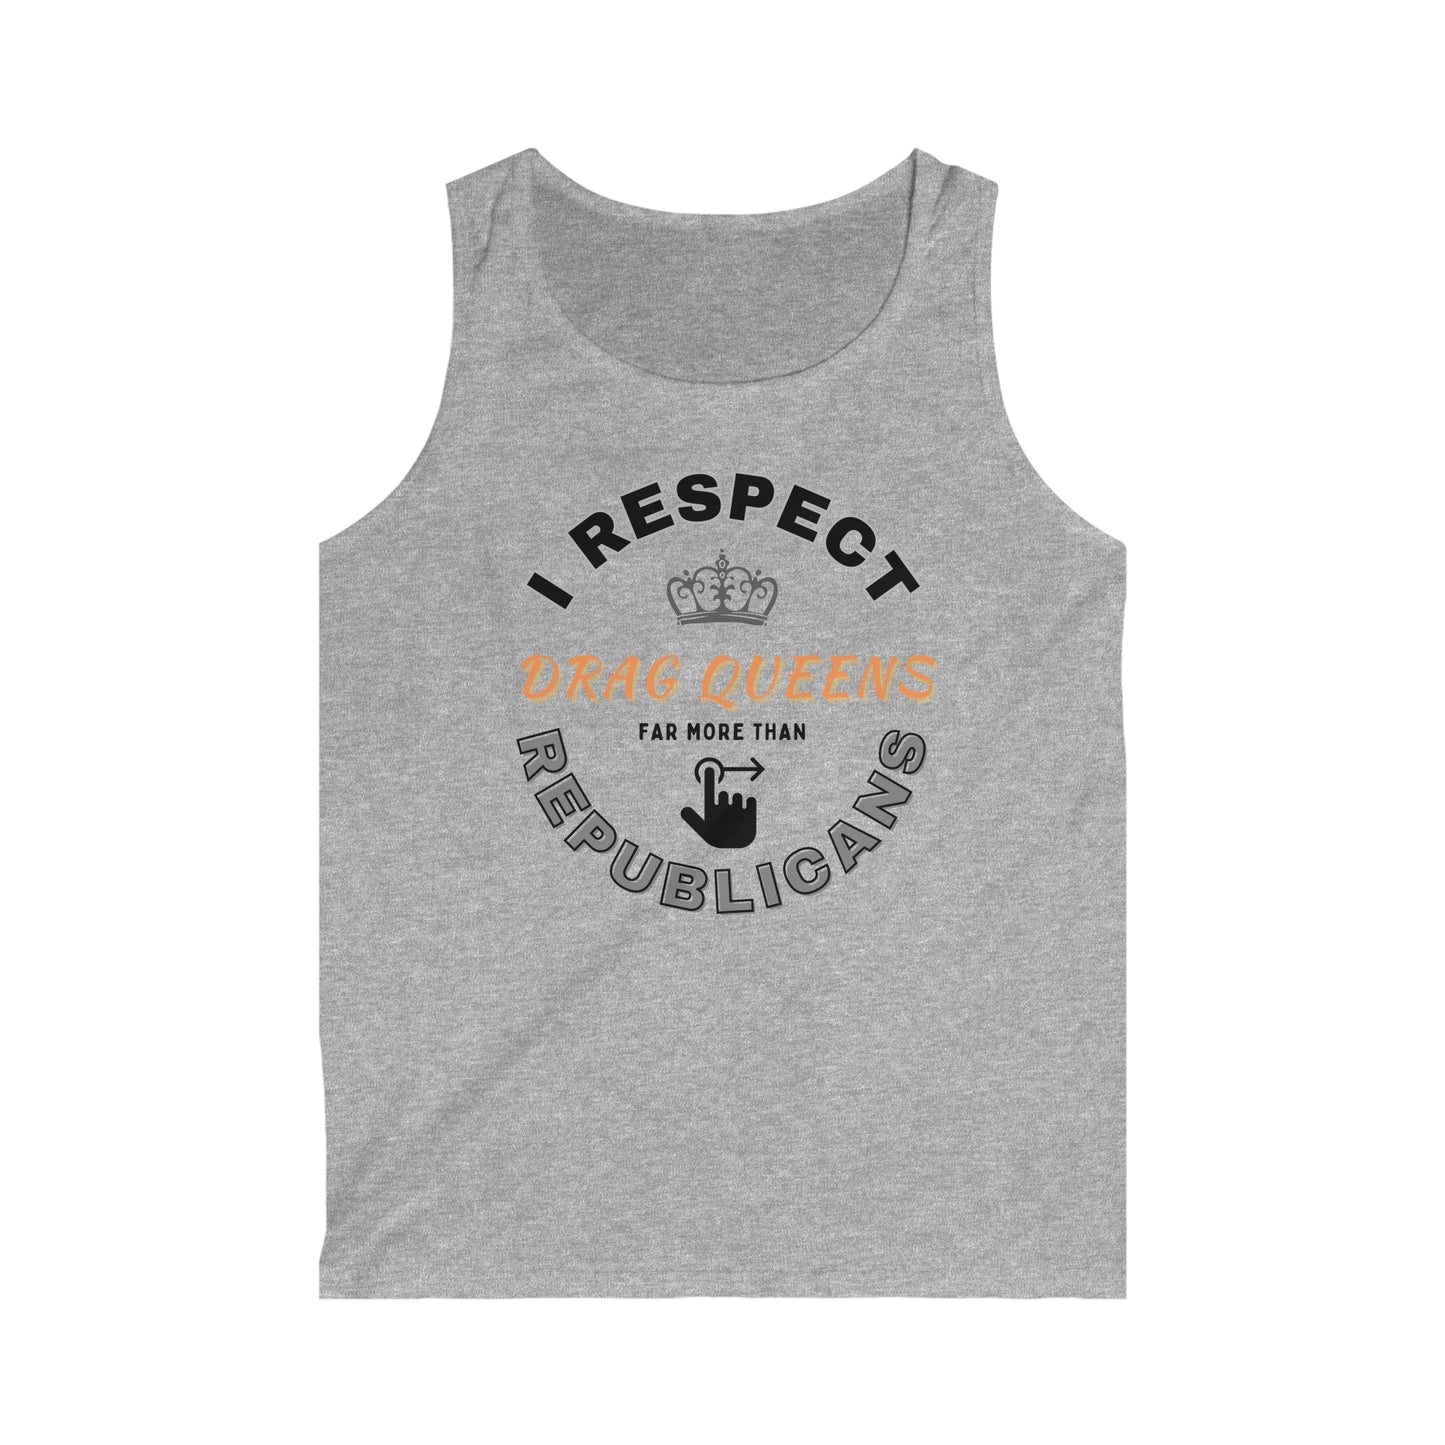 I Respect Drag Queens Men's Softstyle Tank Top